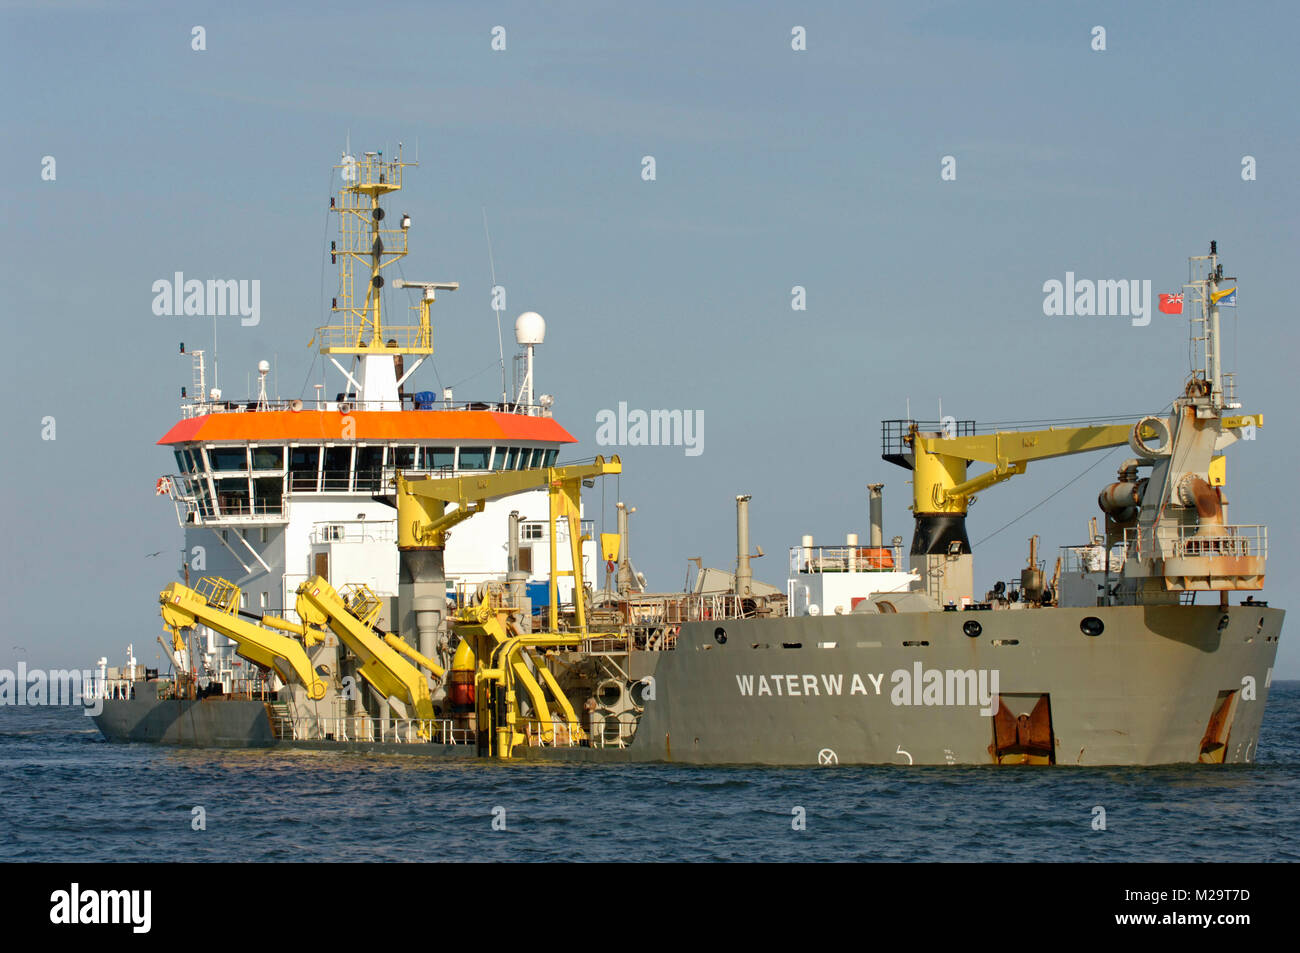 Waterway a Hopper Dredger pictured at the mouth of the South Esk river, Montrose, Angus, Scotland. Stock Photo